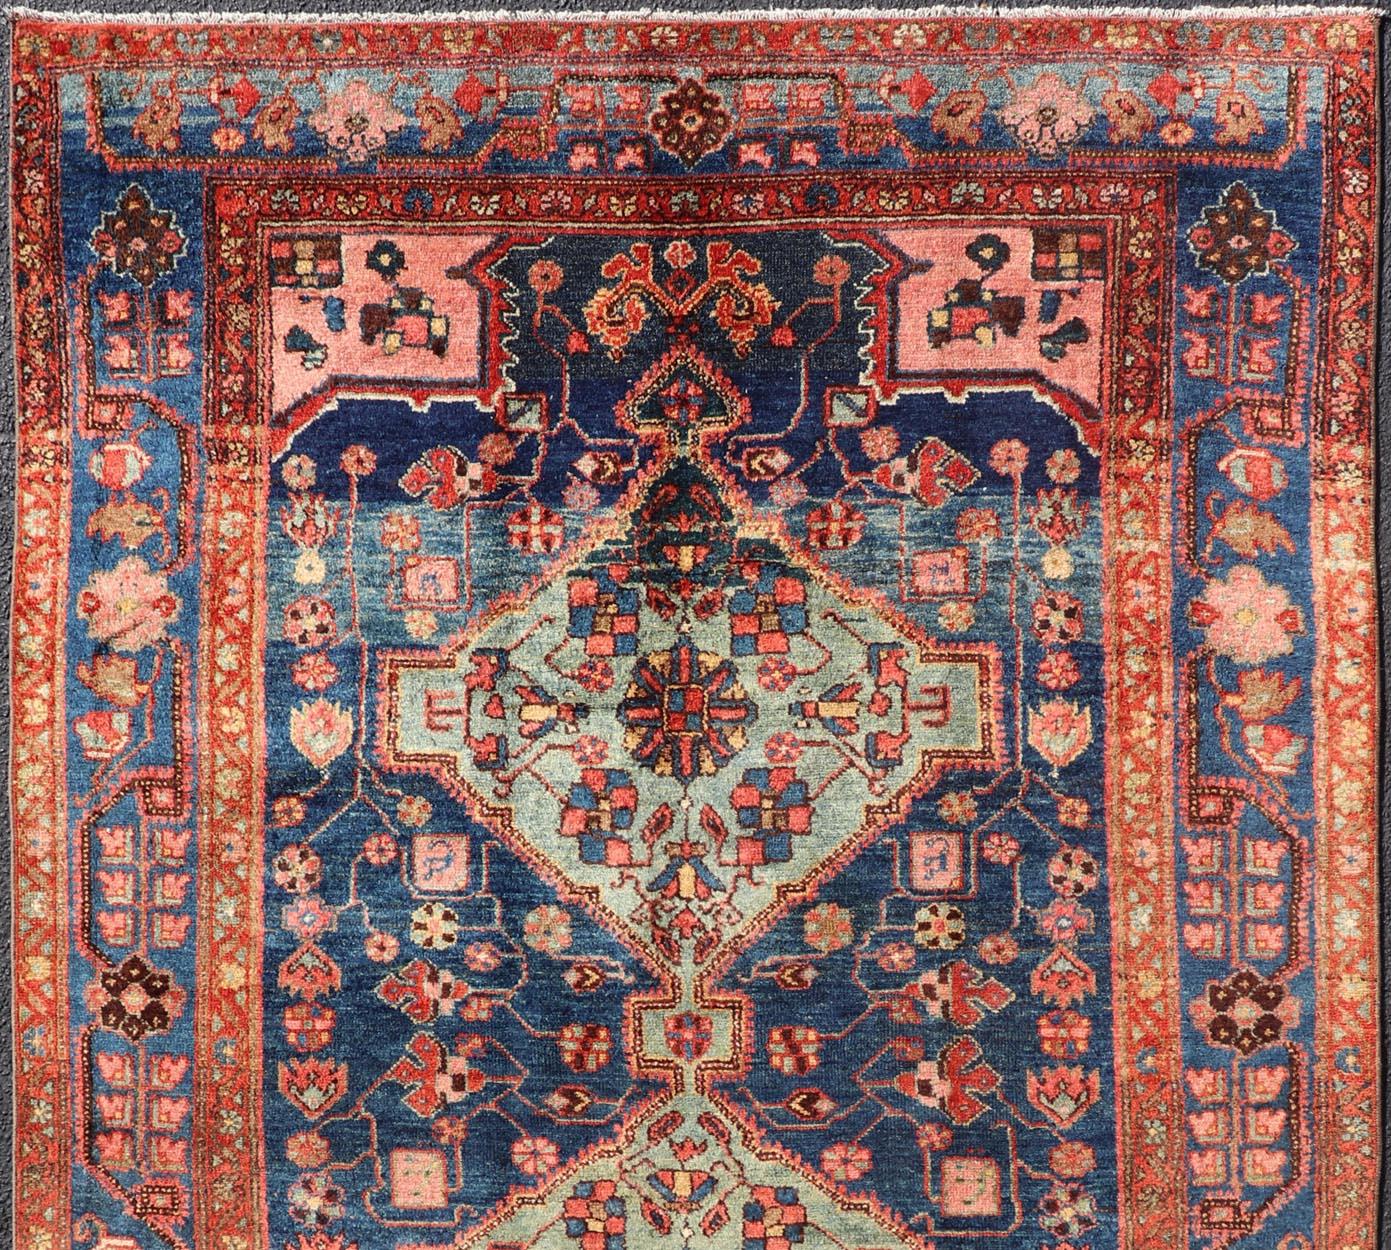 Hand-Knotted Antique Persian Karajeh Rug with Geometric Medallions in Green, Blue, and Red